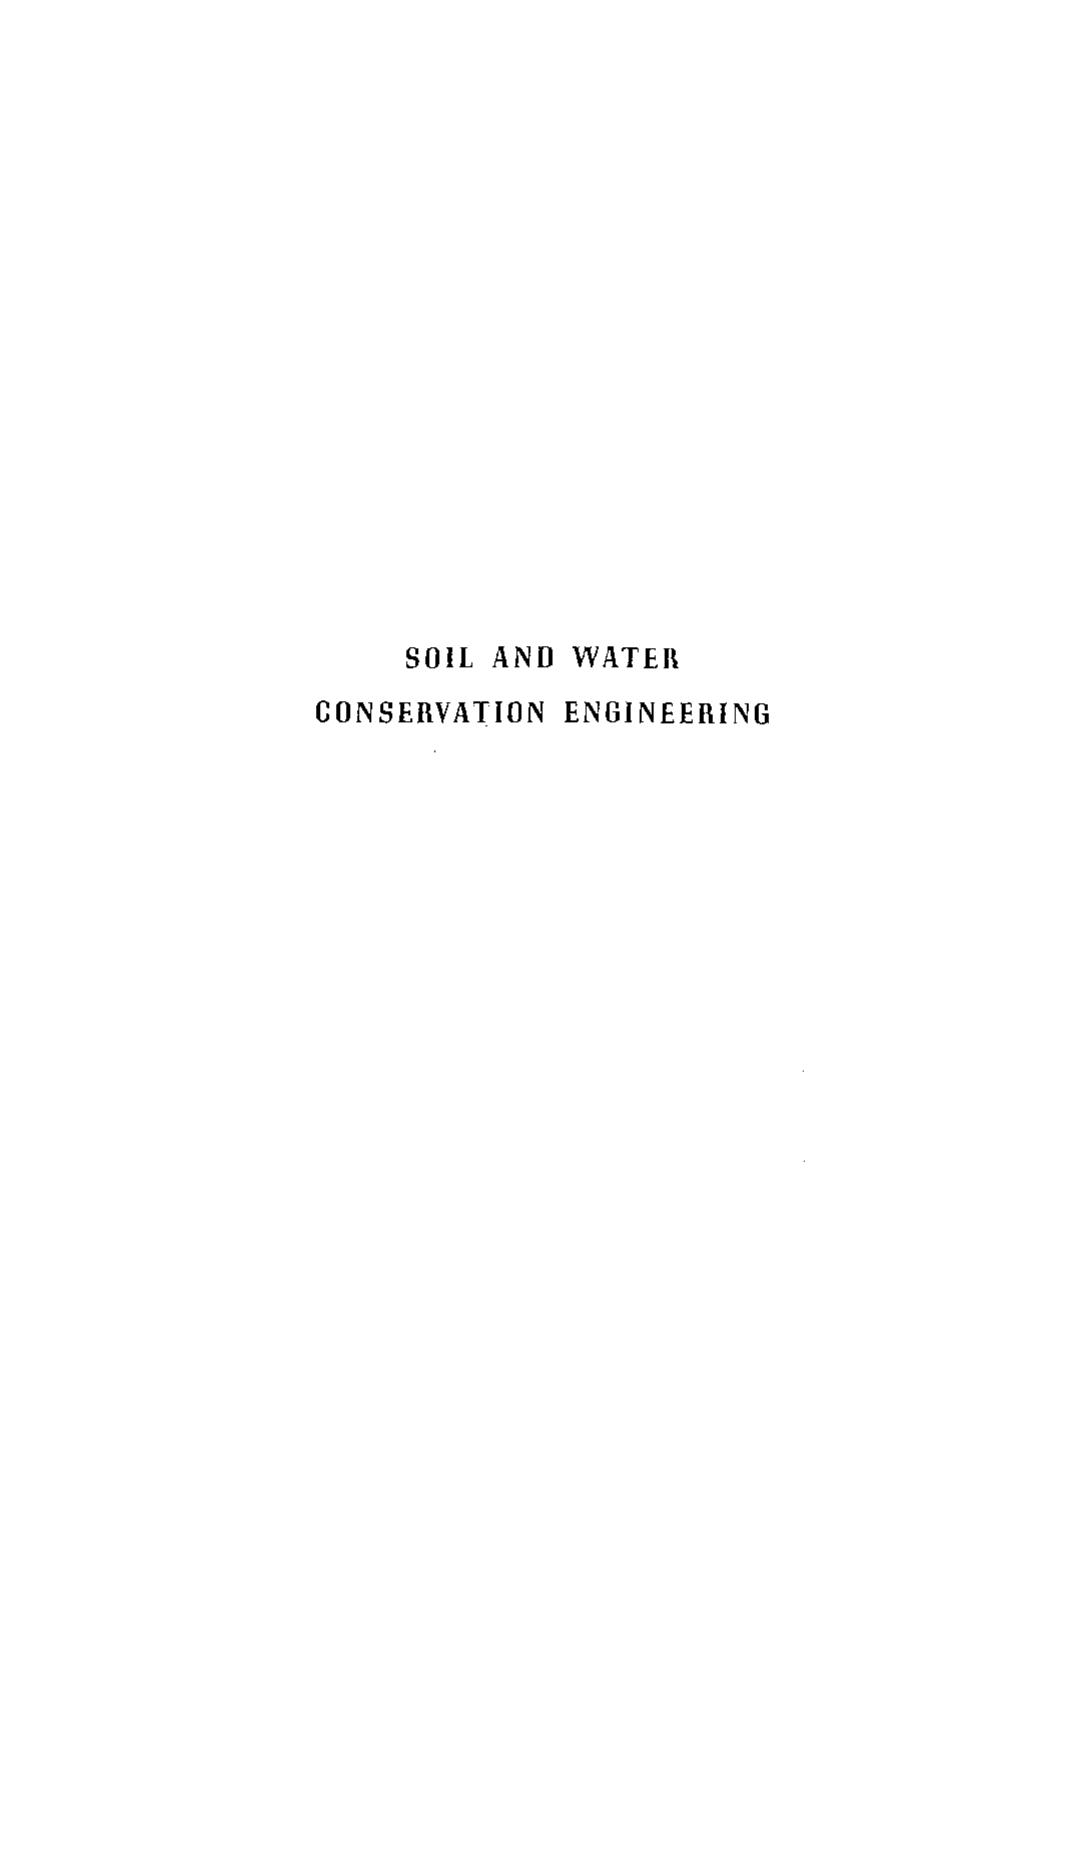 soil and water conservation engineering ( PDFDrive.com ) 2